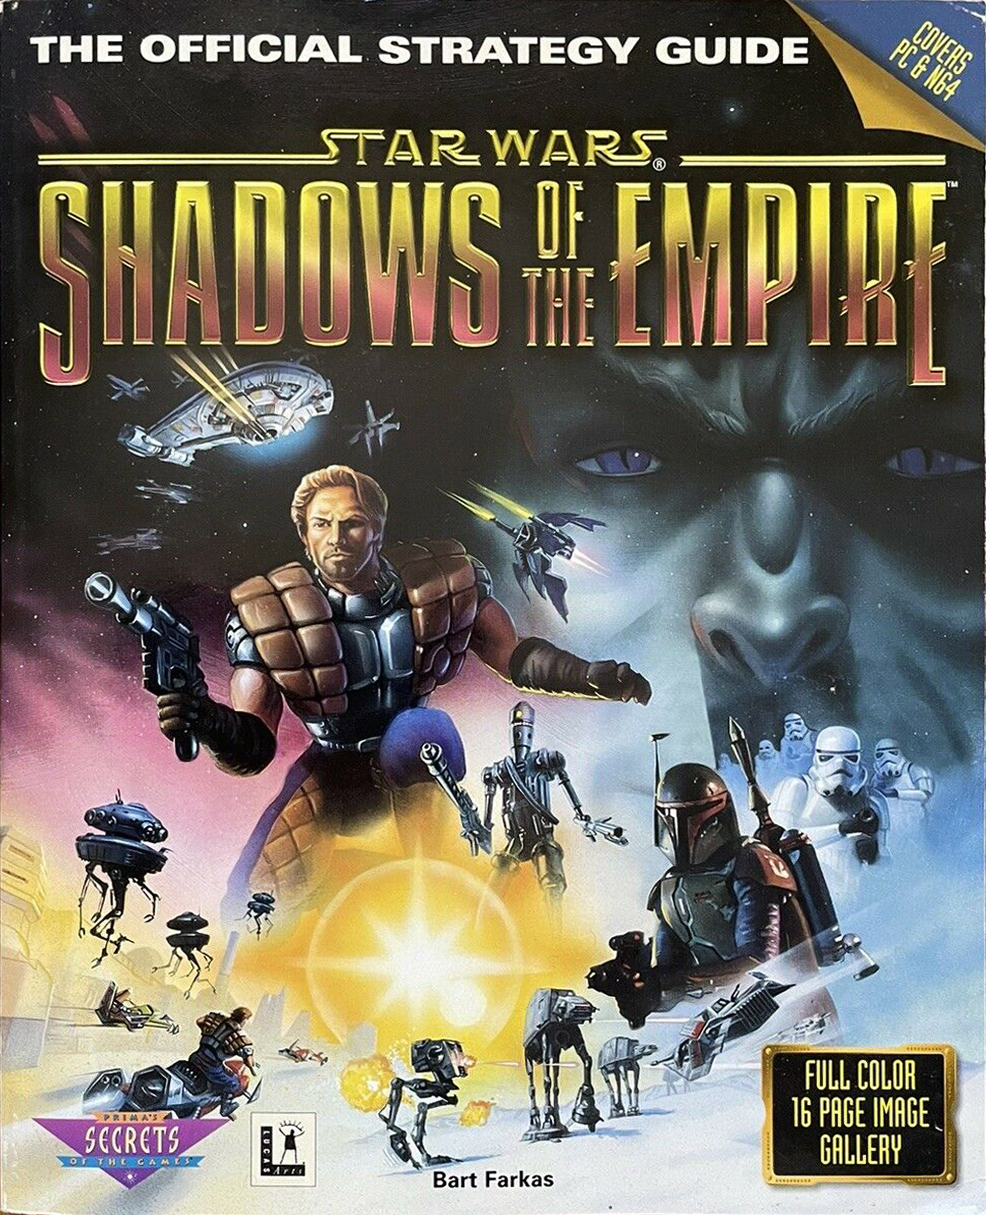 Star Wars RPG Shadows of the Empire Planets Guide West End Games 40134 –  Adventures And Hobbies